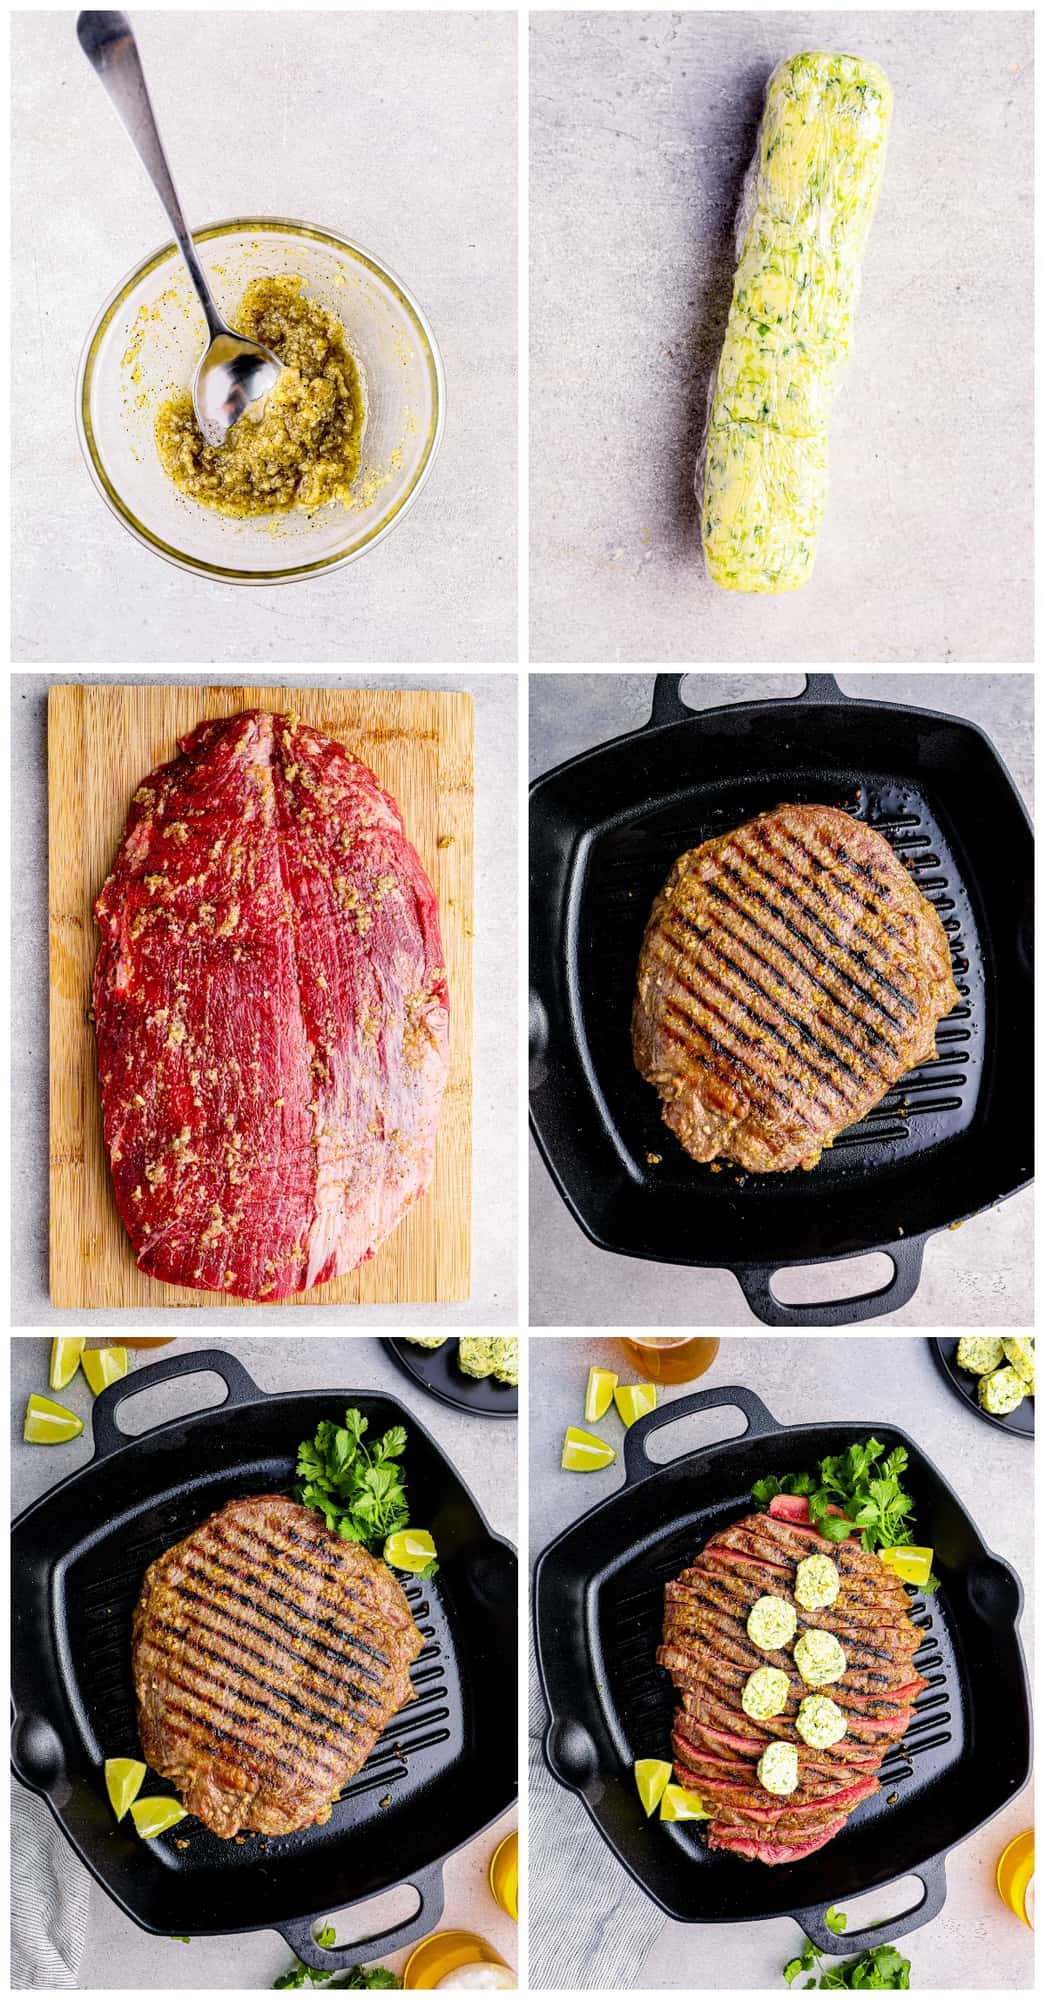 5 Ingredient Flank Steak (easy to make + perfect for grilling!)